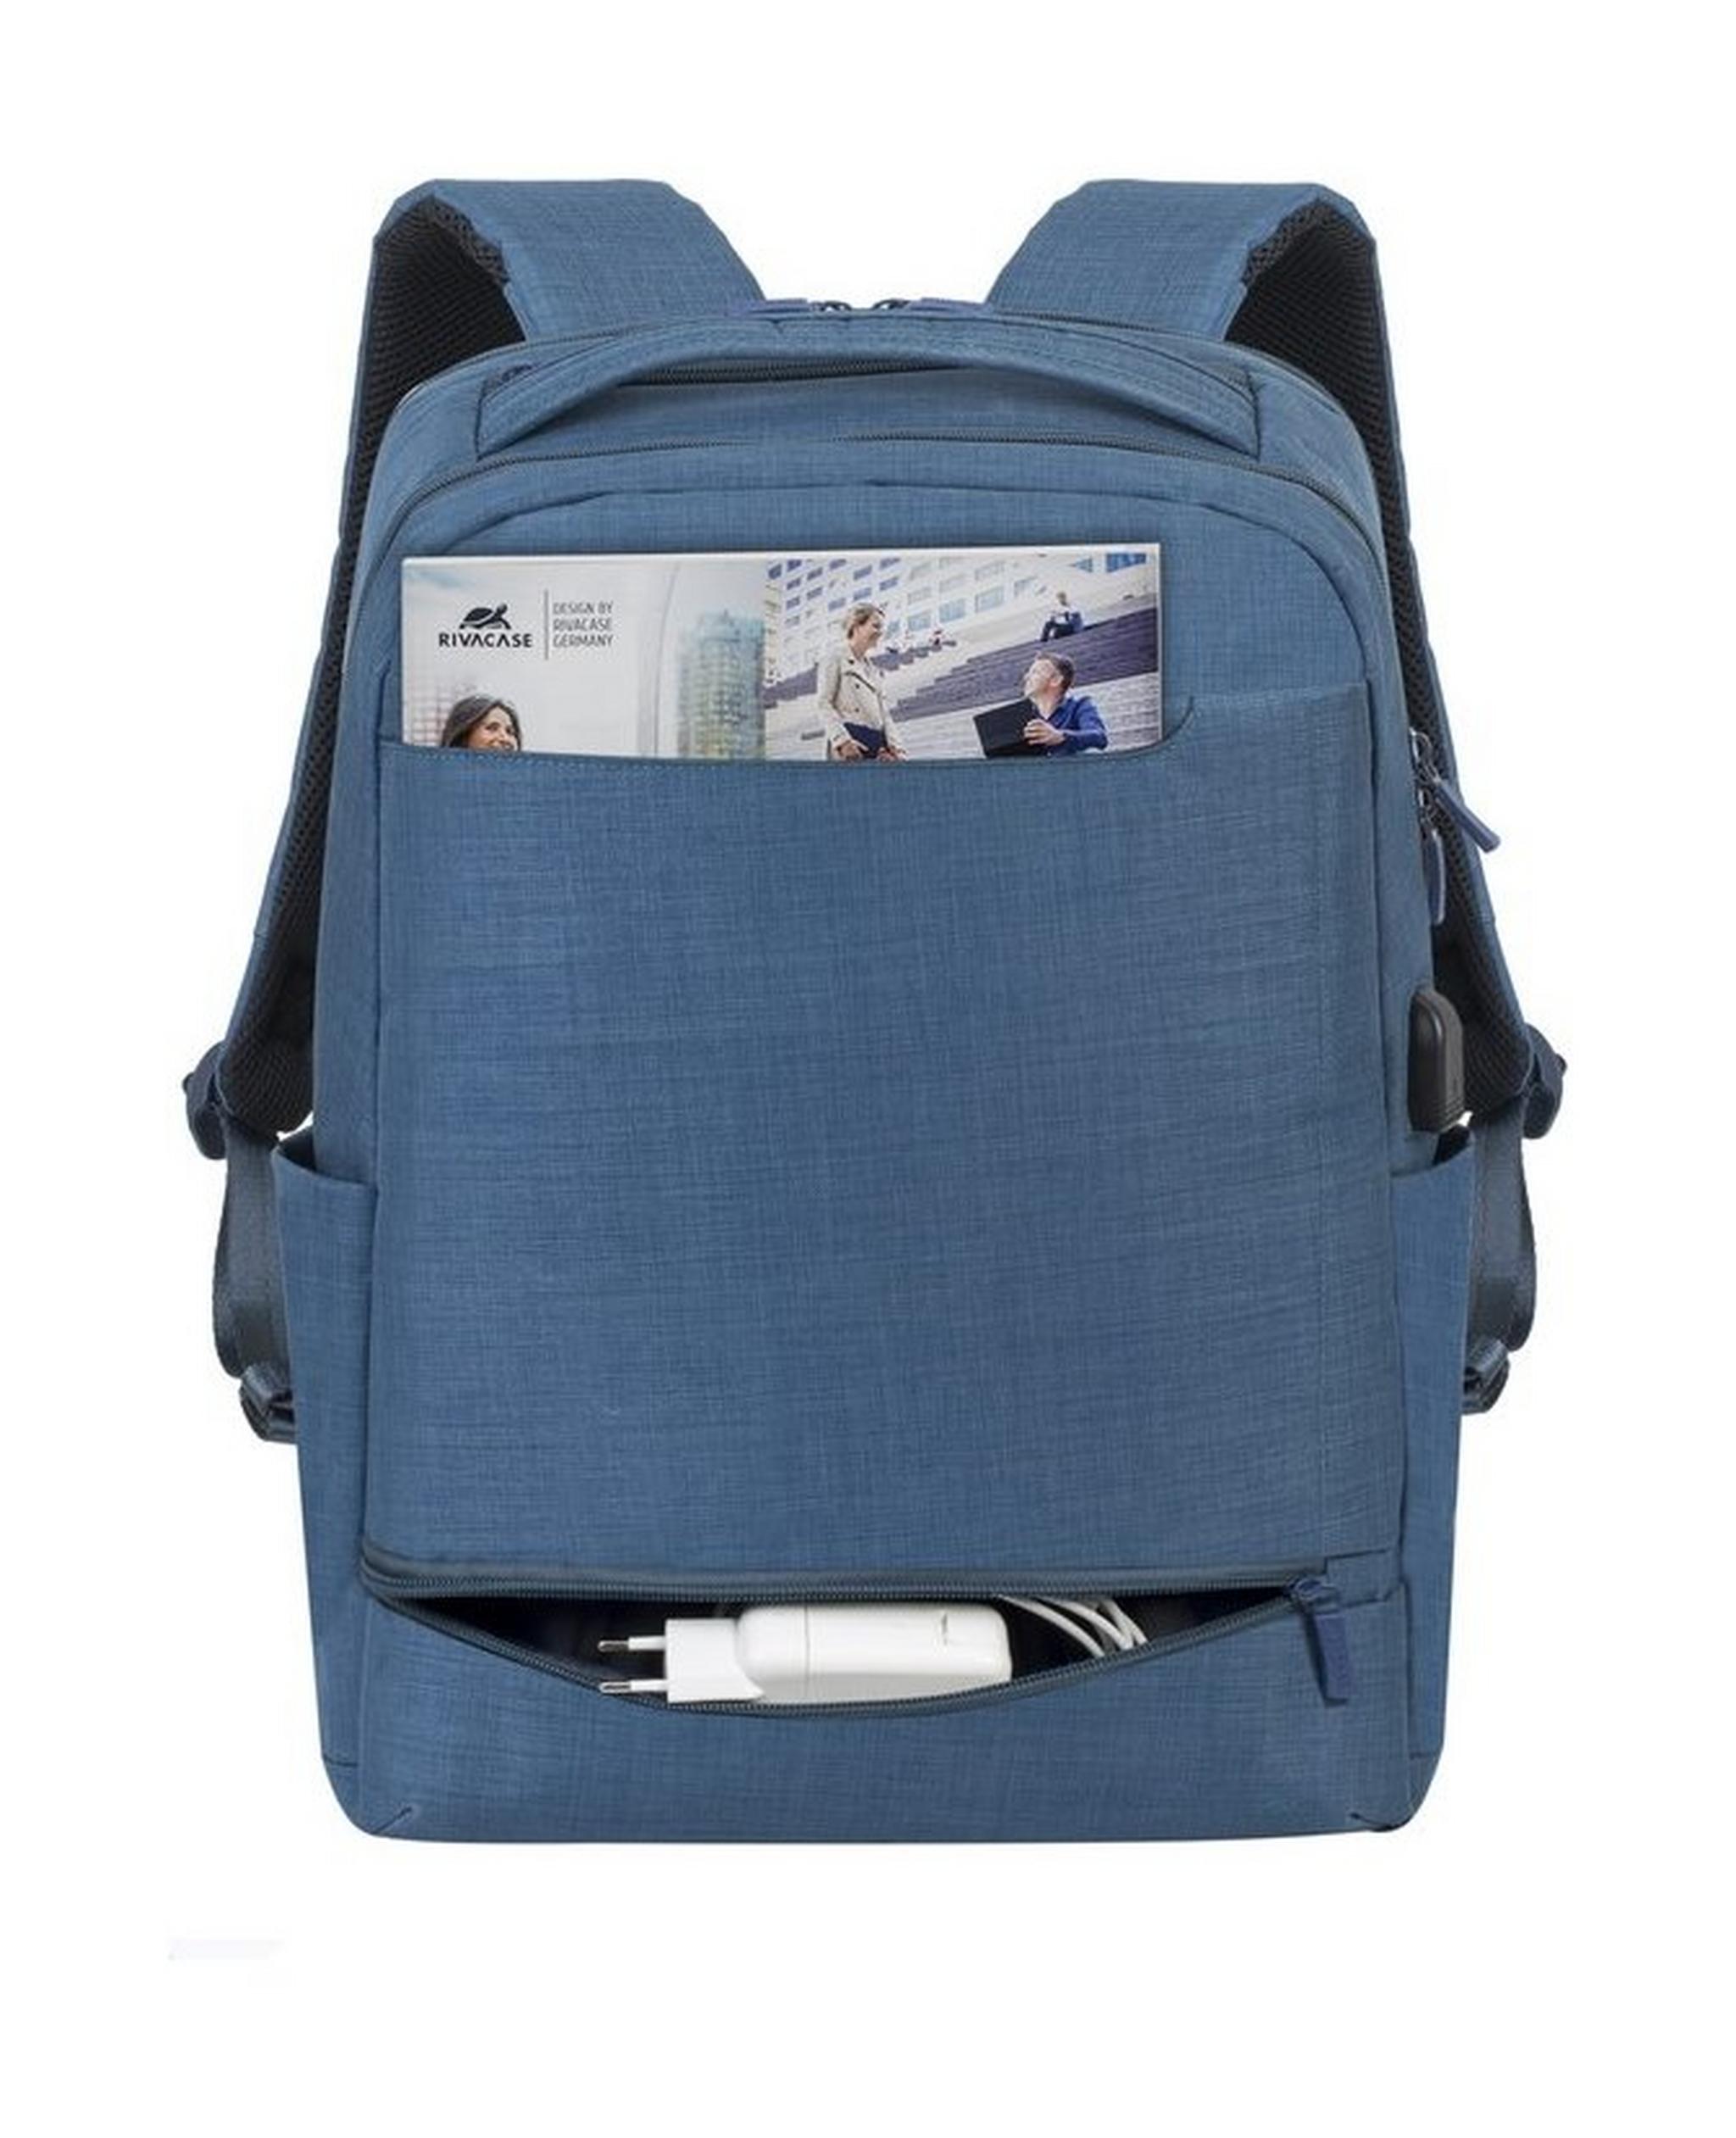 RivaCase 17.3 Inch Carry-On Laptop Backpack (8365) - Blue